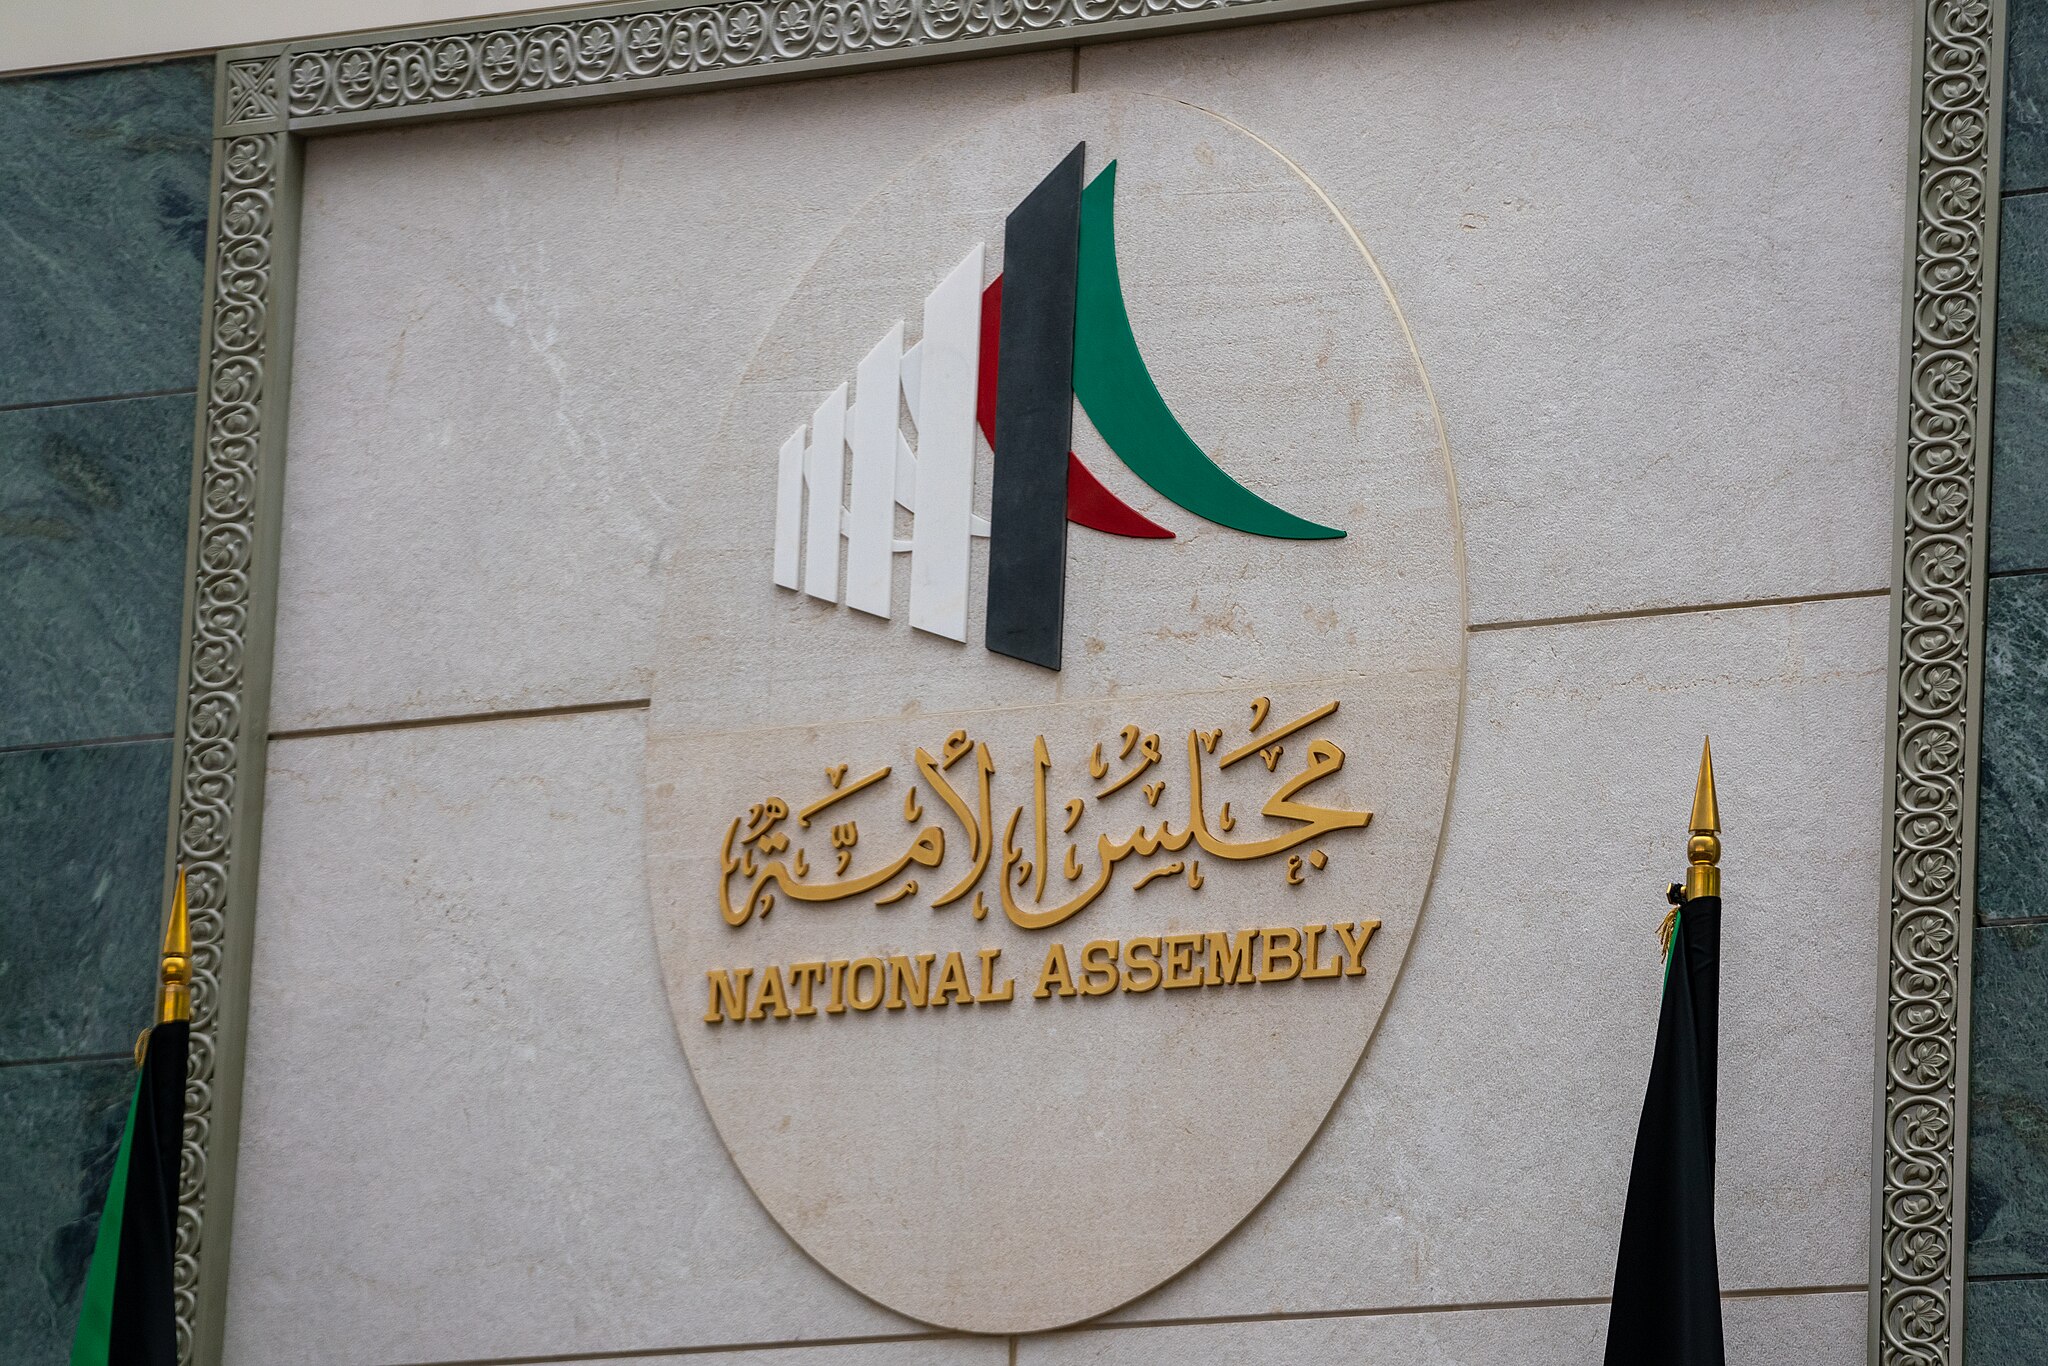 Kuwait leader dissolves parliament and suspends constitutional provisions